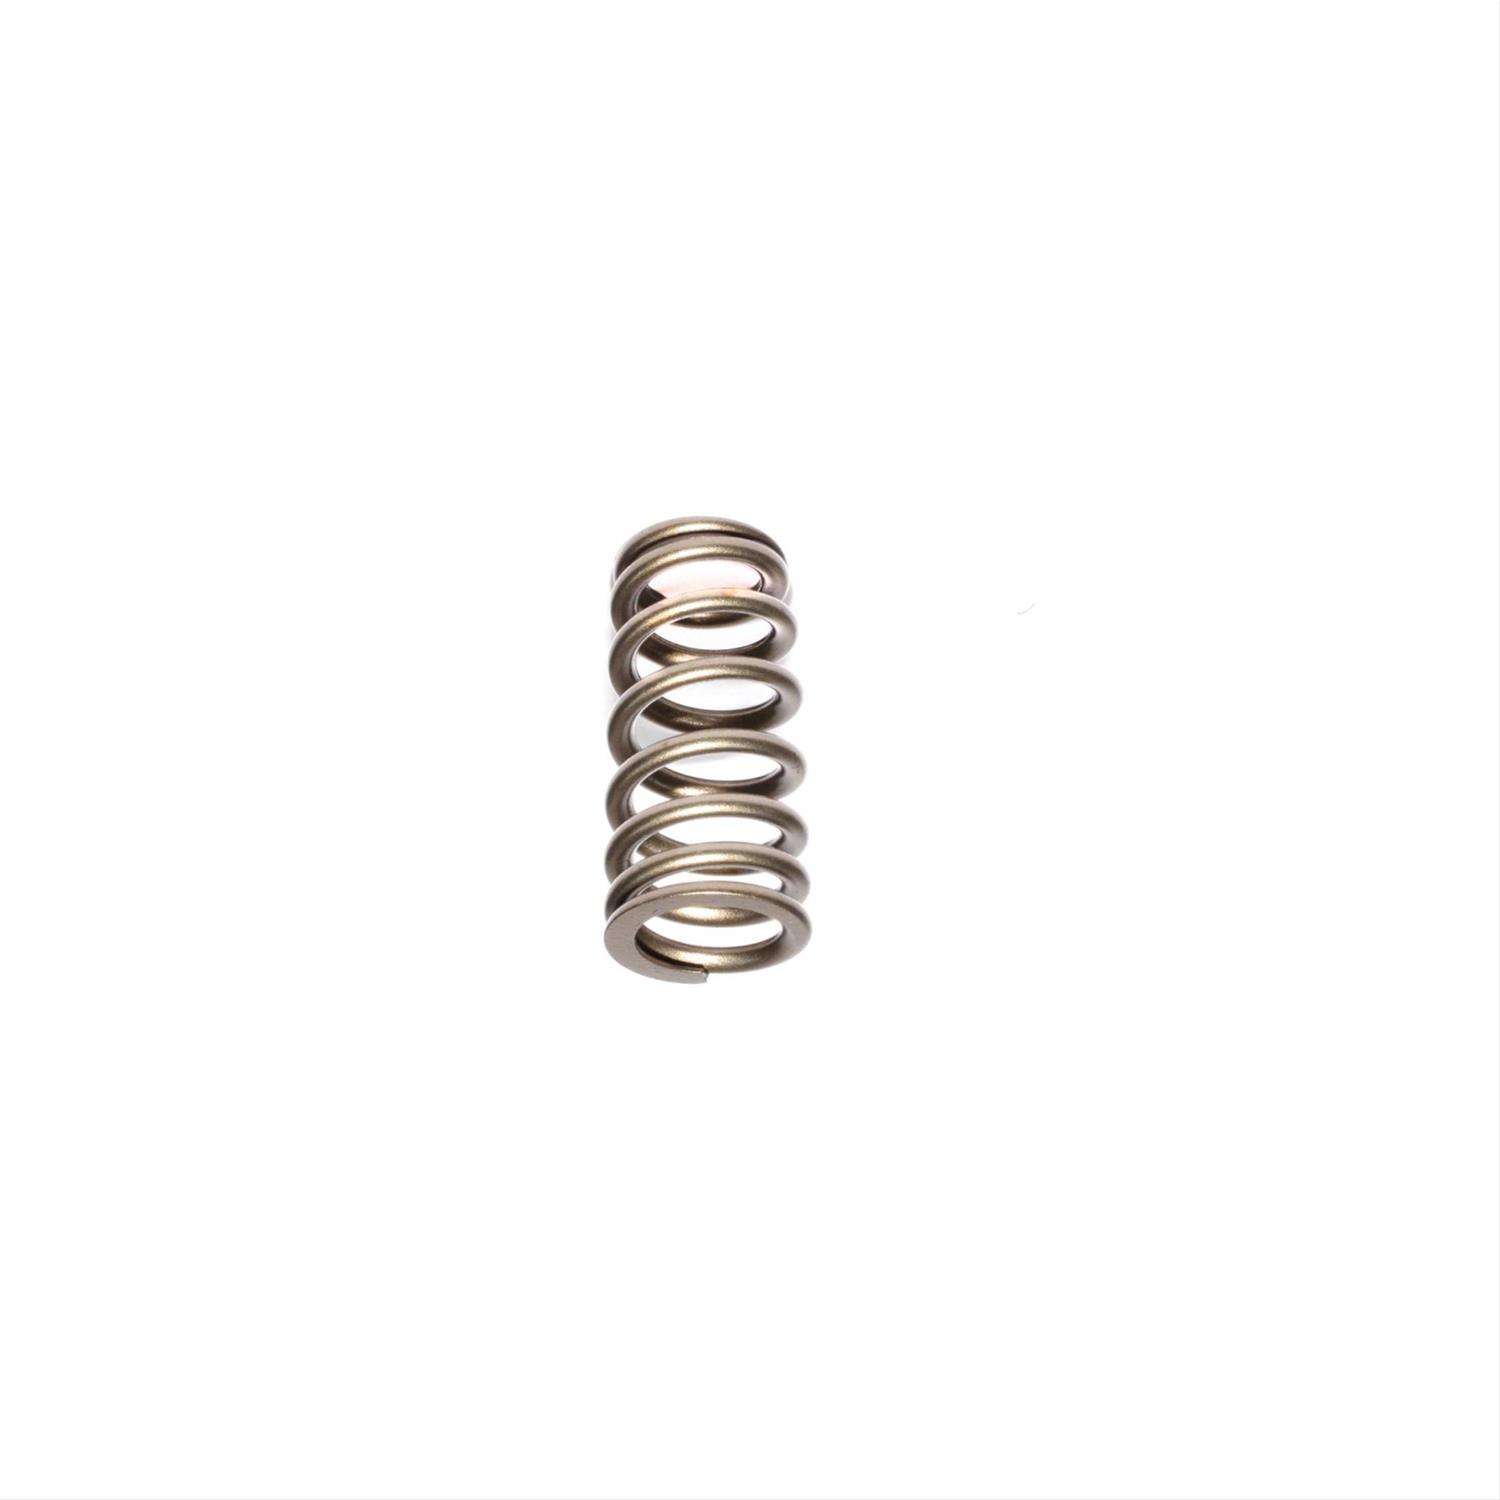 FORD 4.6L 3 VALVE BEEHIVE SPRING SINGLE .550 LIFT